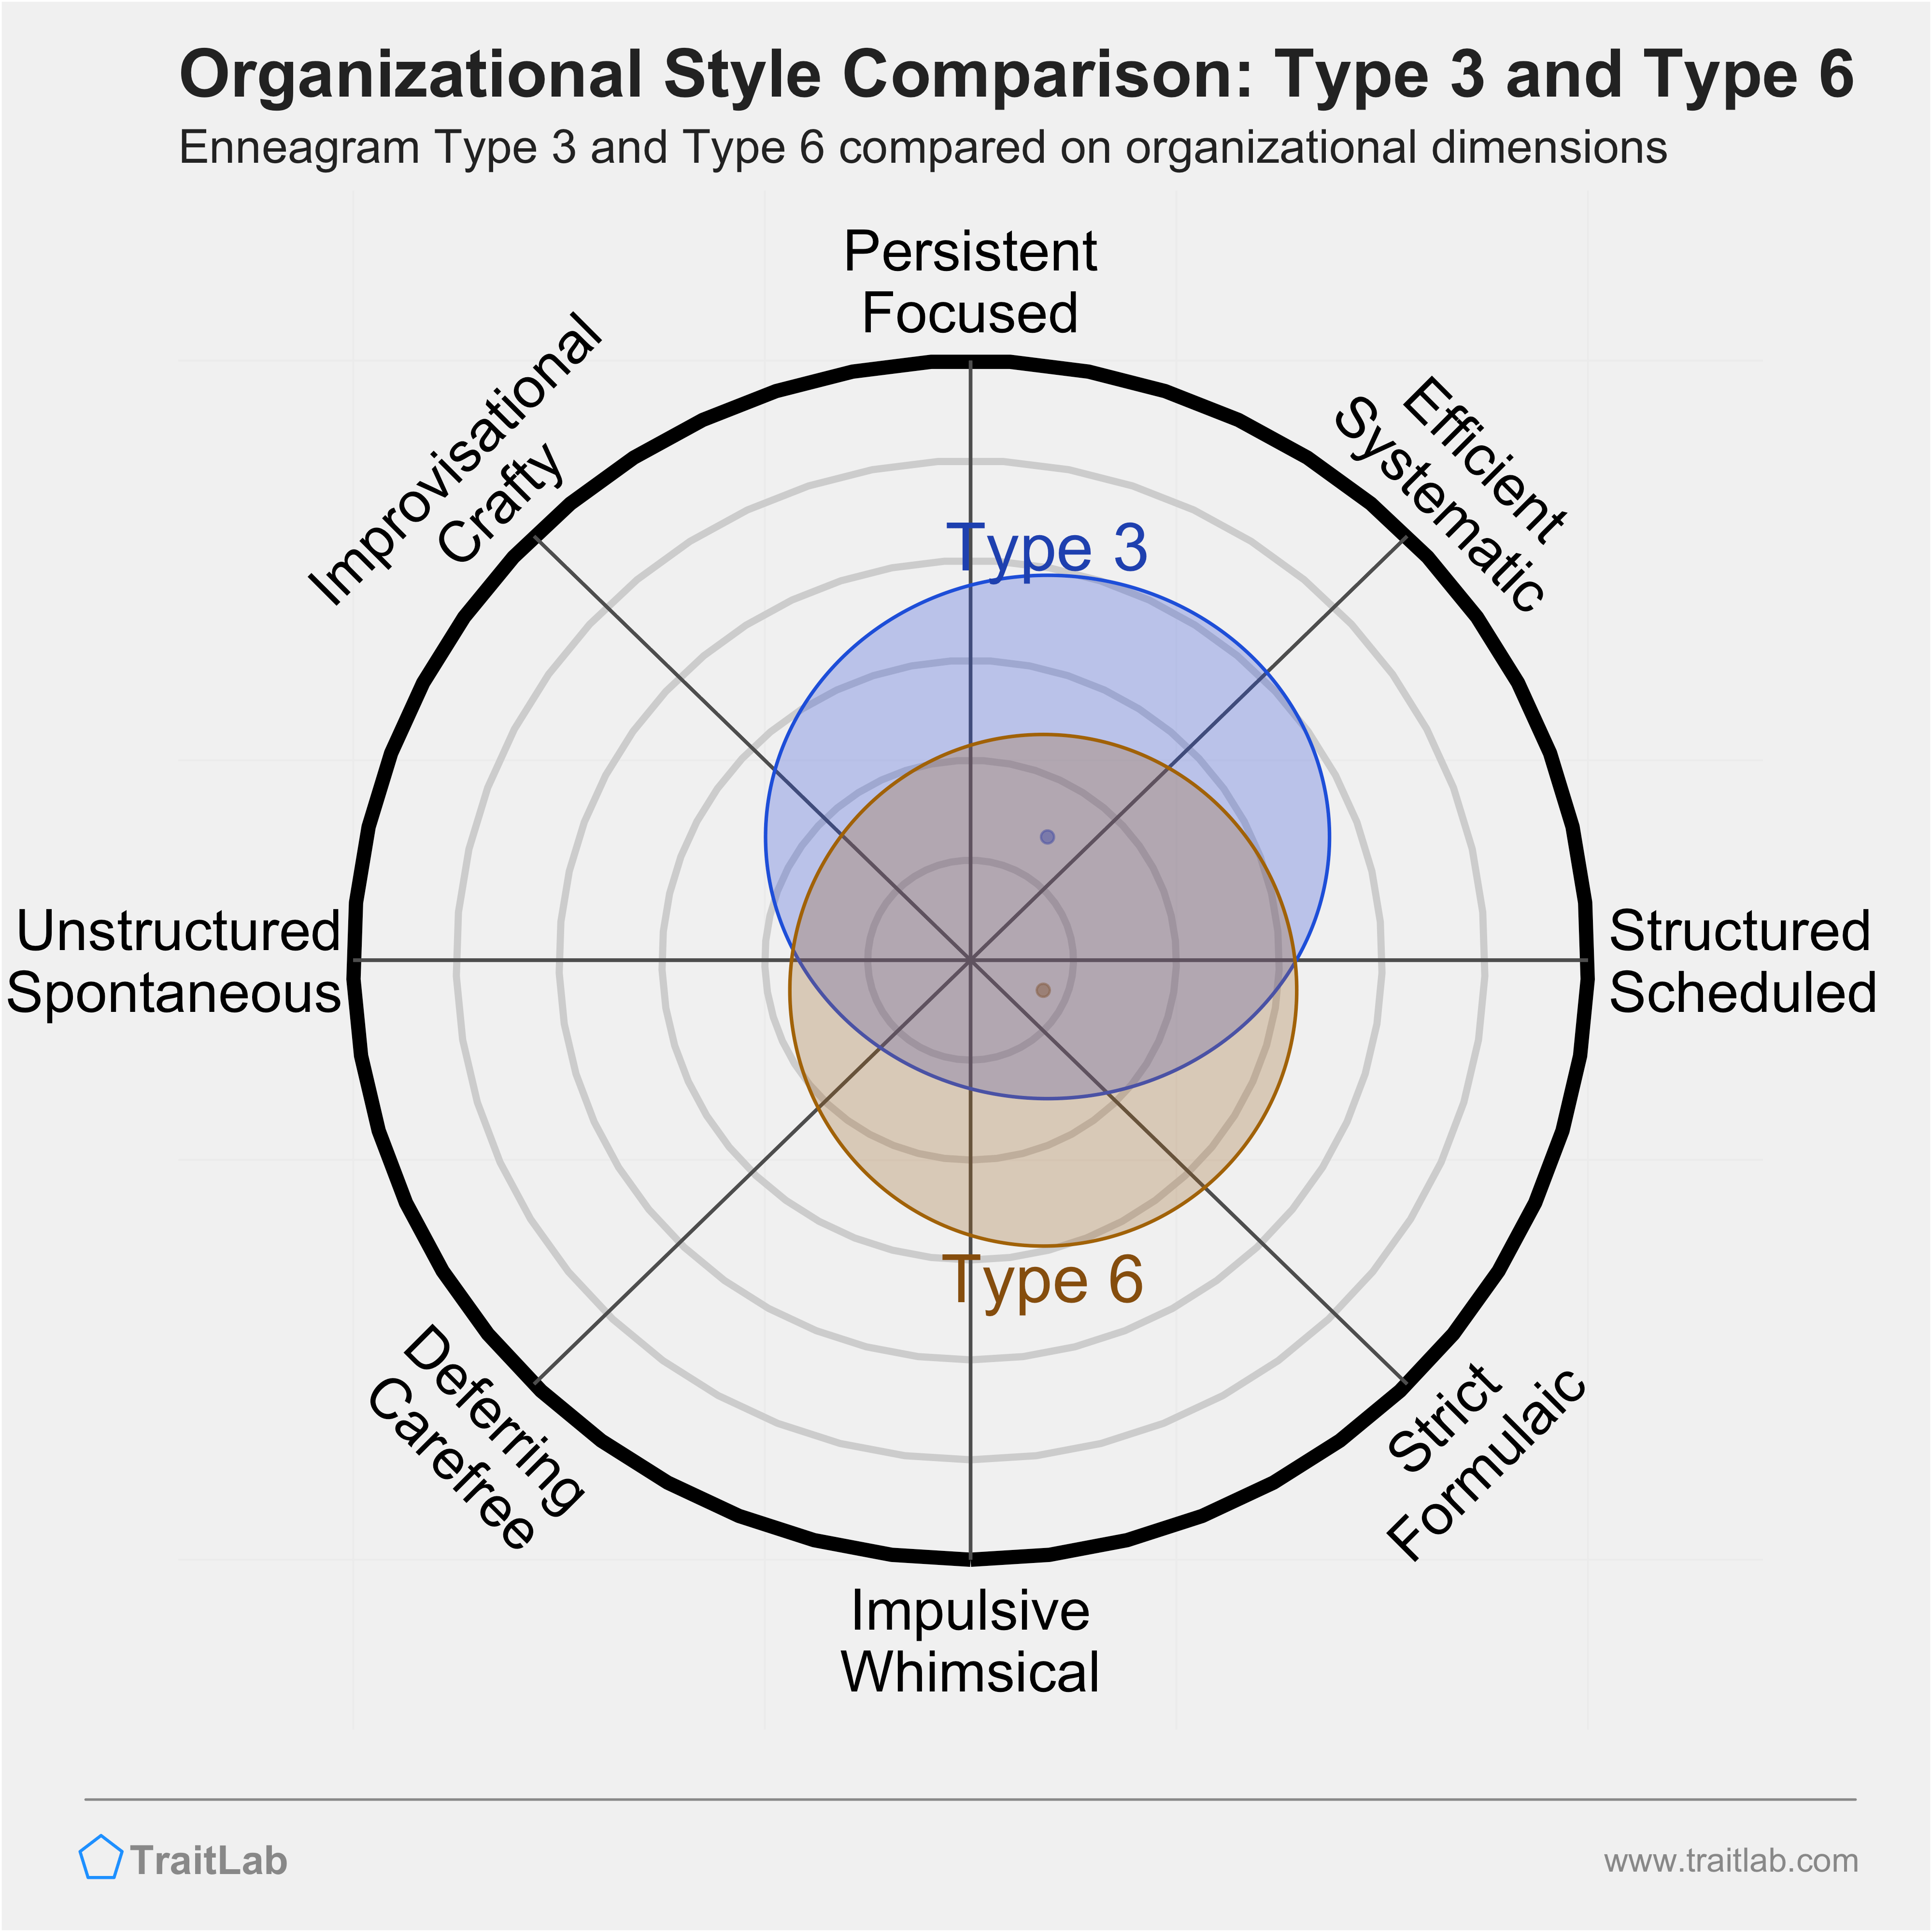 Type 3 and Type 6 comparison across organizational dimensions